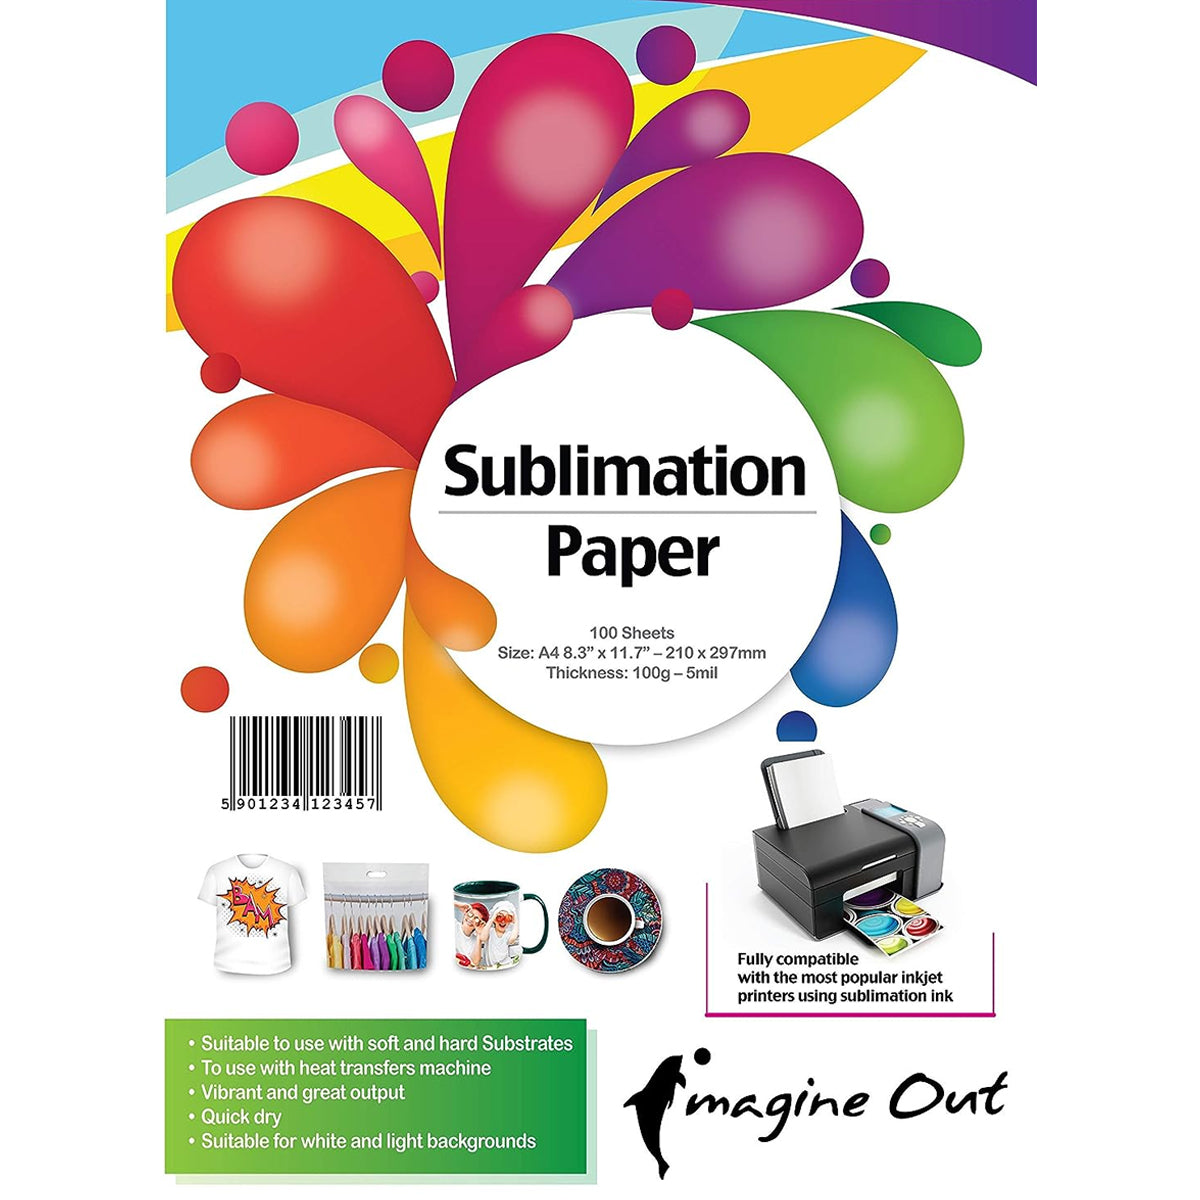 ImagineOut Resin Coated Luster Photo Paper